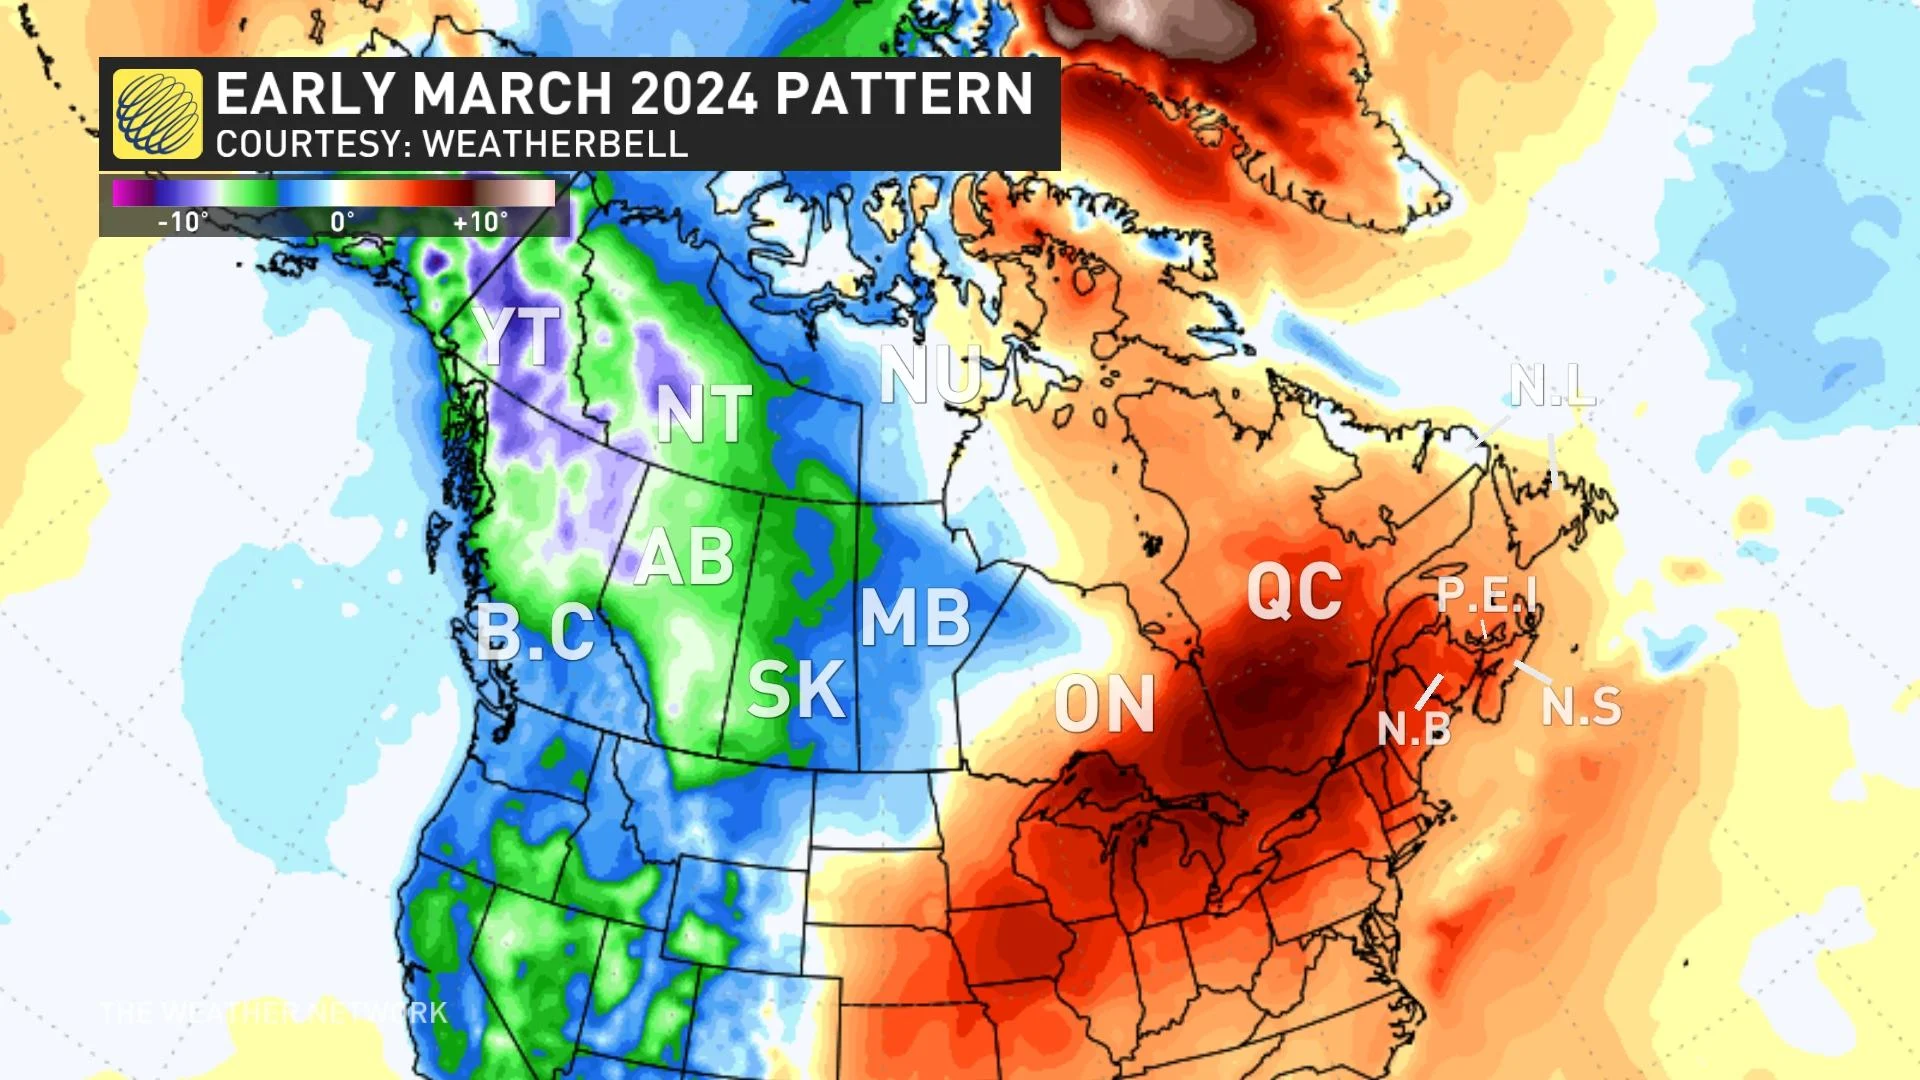 Early March 2024 Pattern